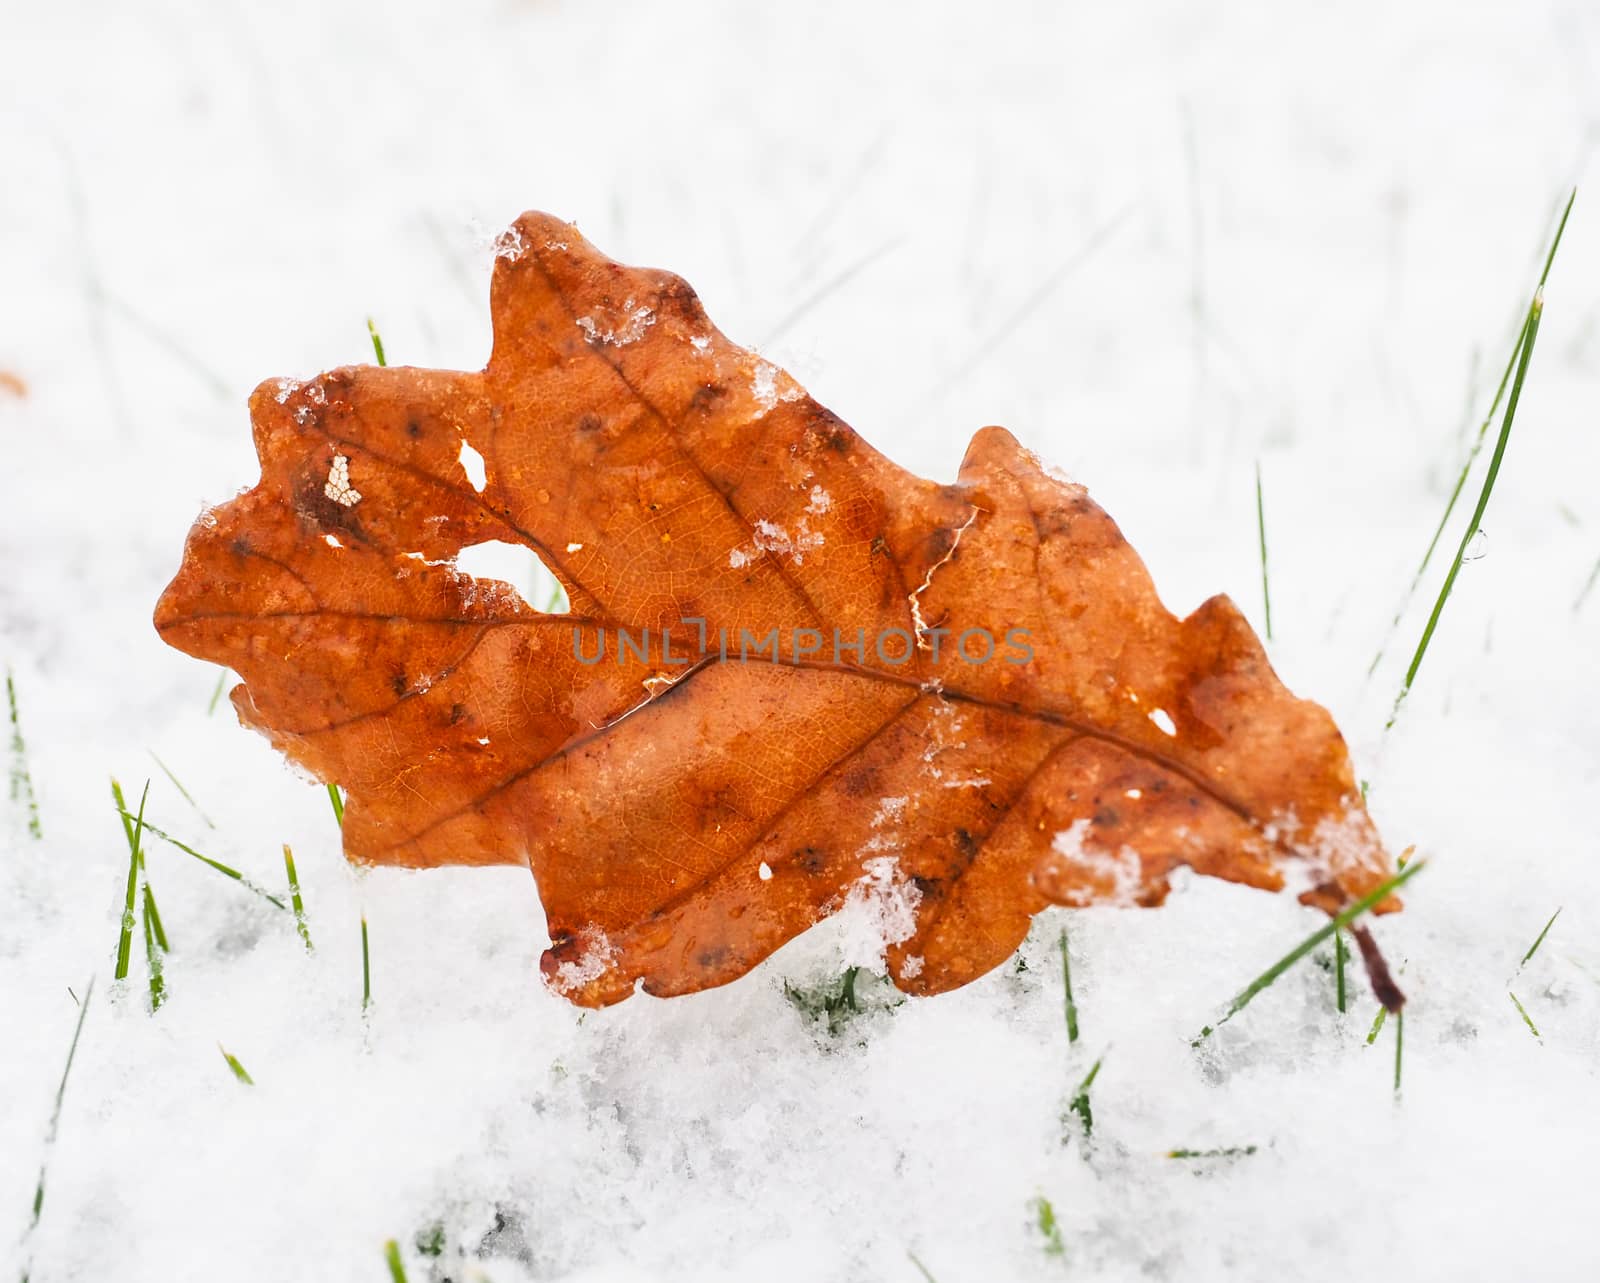 Brown oak tree leaf on lawn with a fresh layer of snow